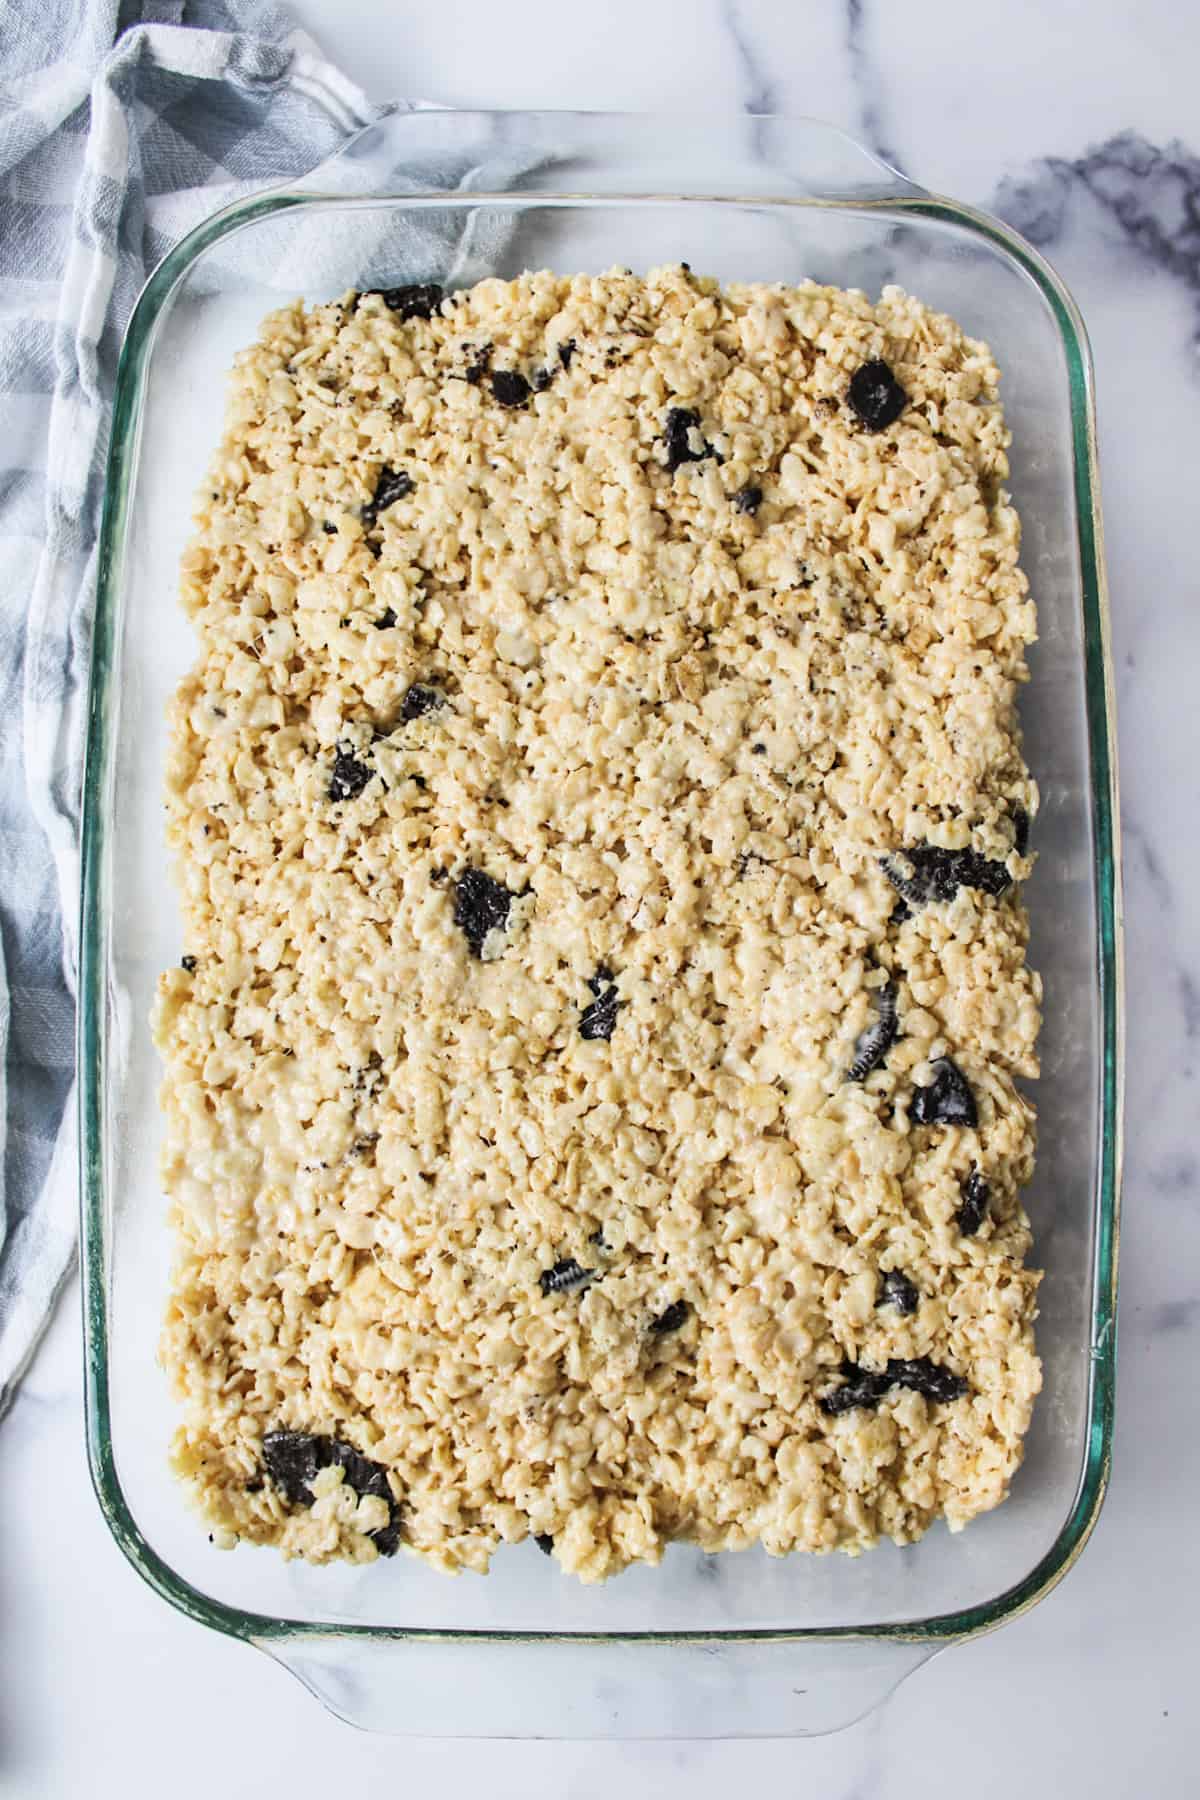 oreo rice krispie mixture pressed into a 9x13 greased baking dish.